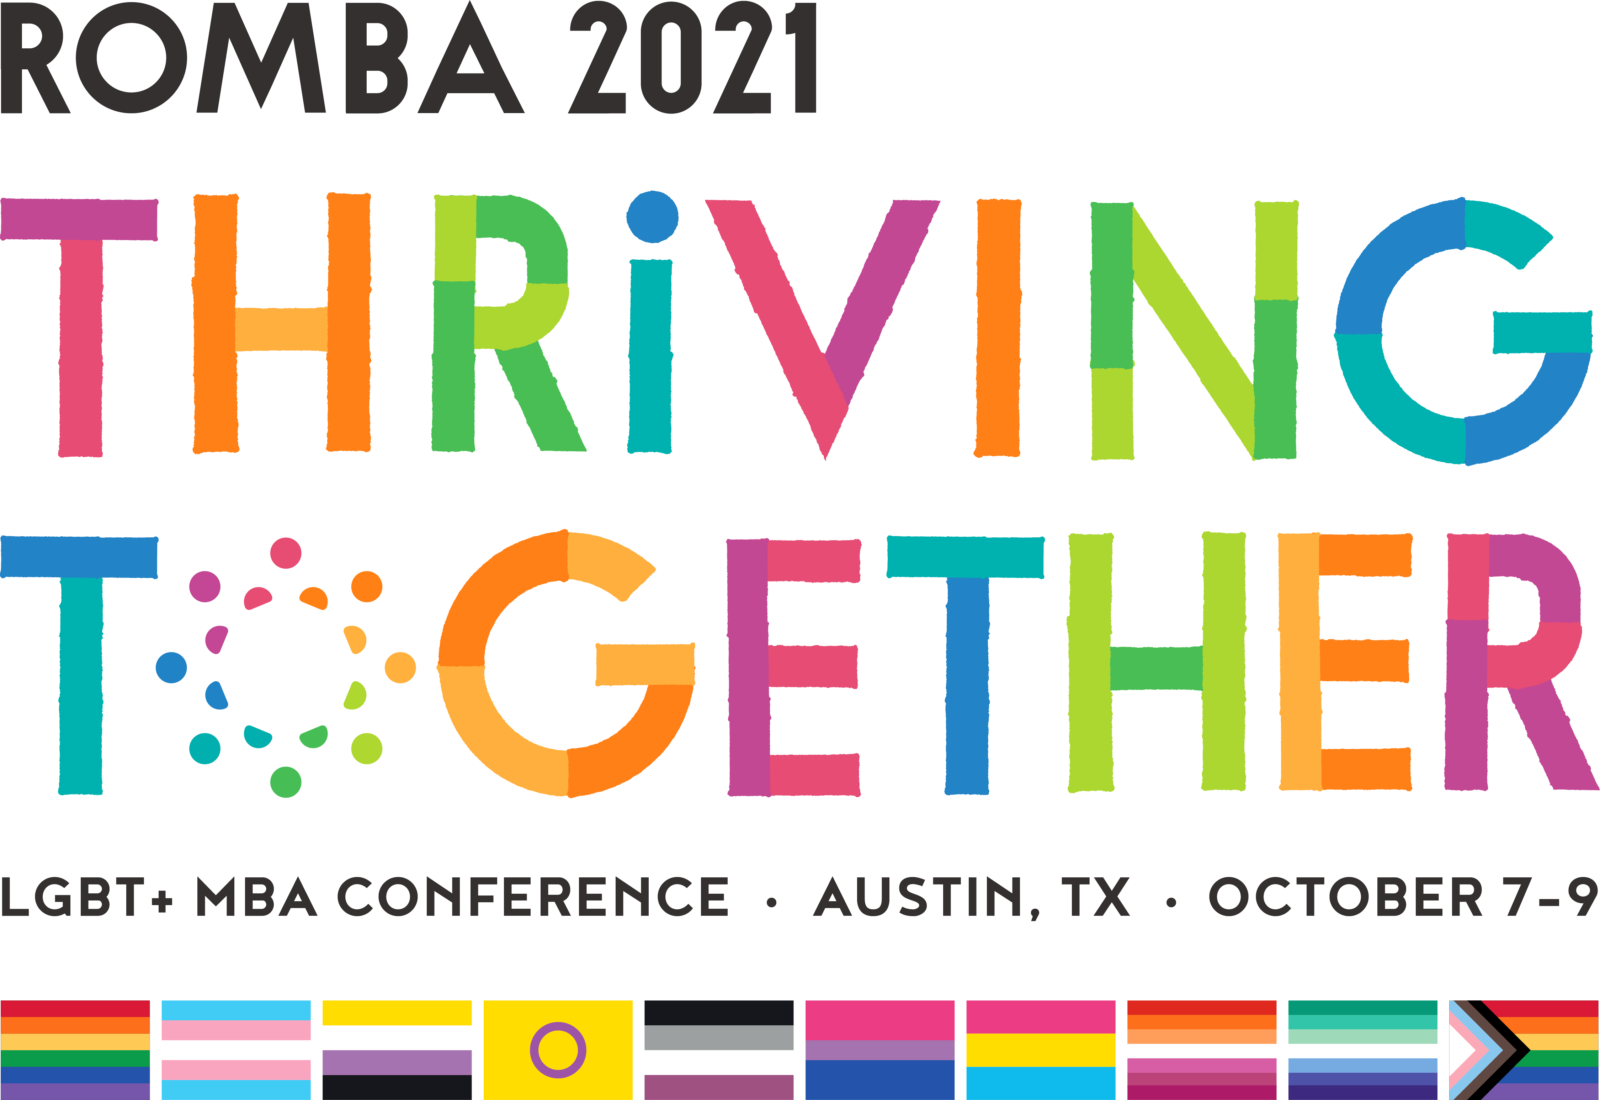 ROMBA 2021 FAQs – Reaching Out LGBT+ MBA